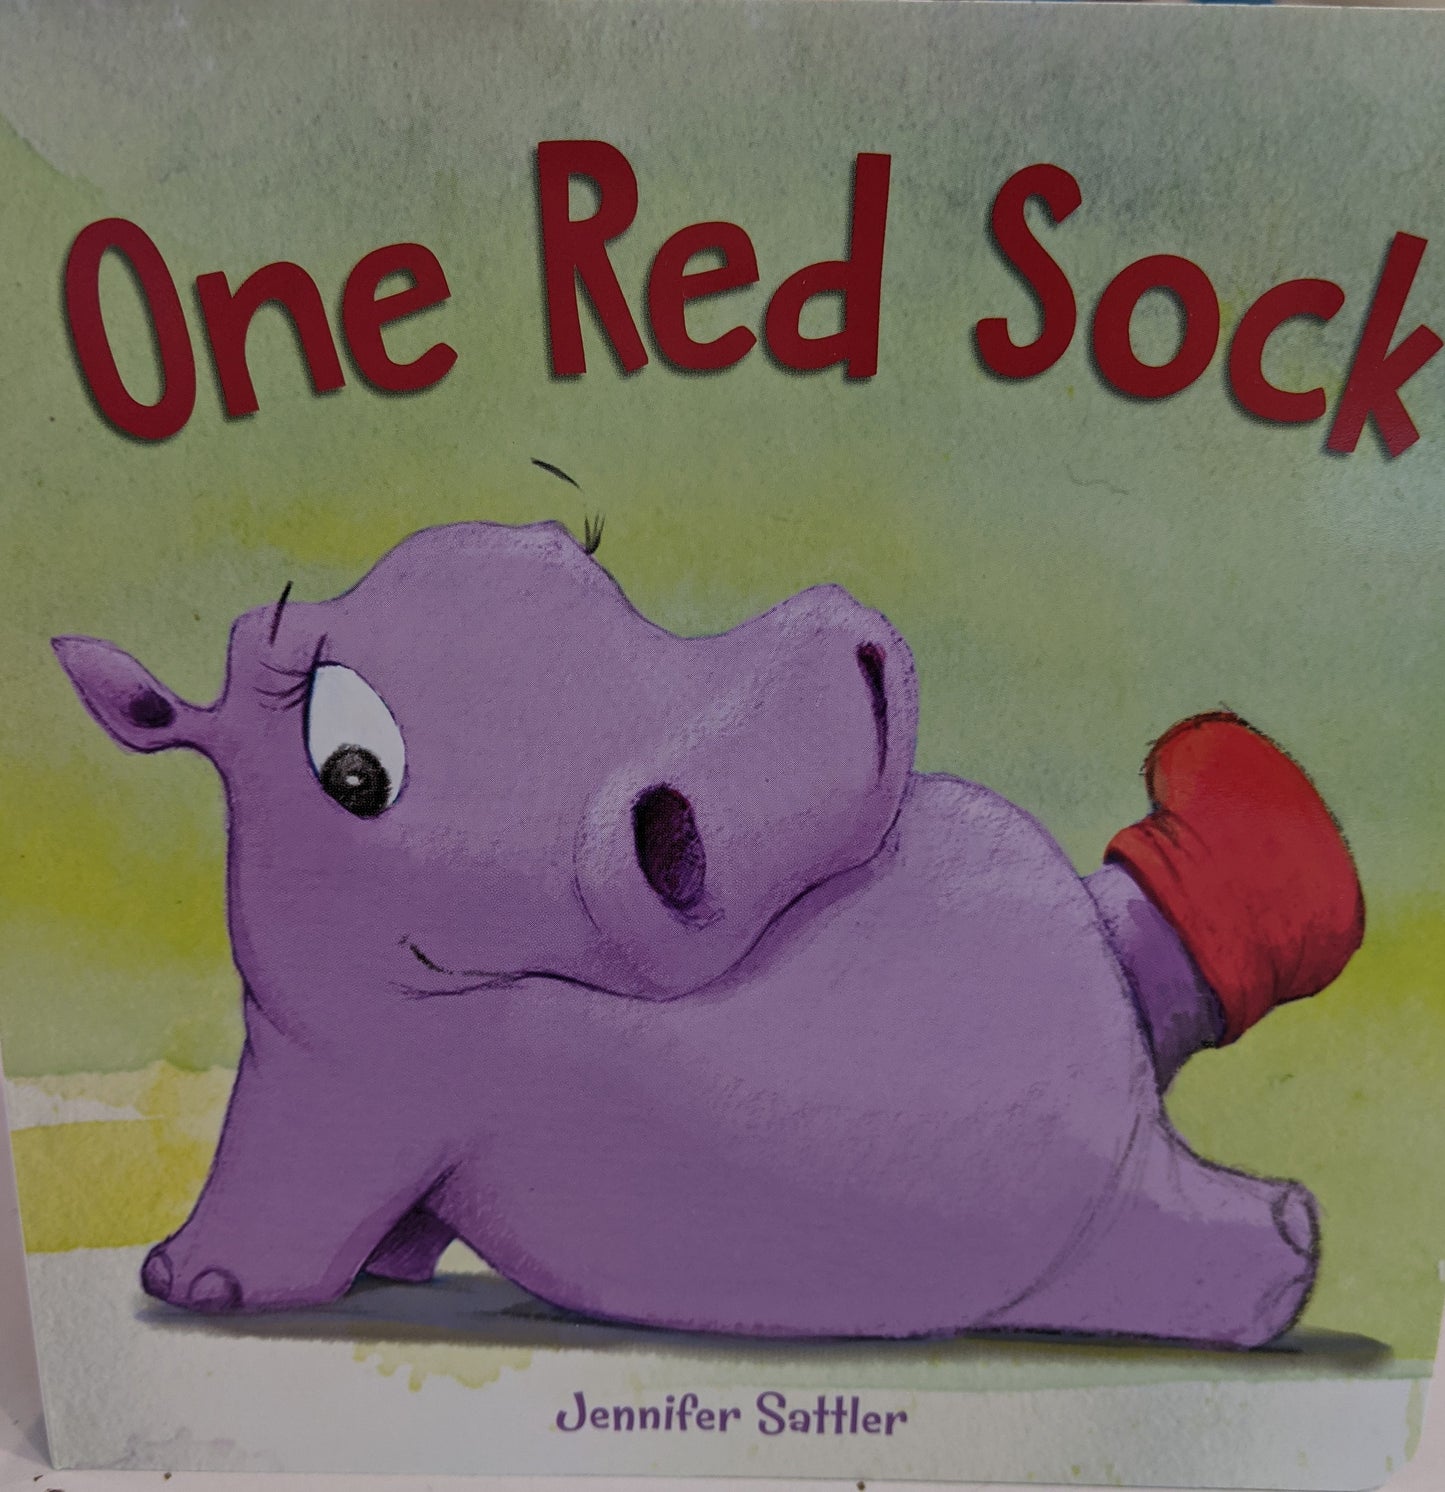 One Red Sock